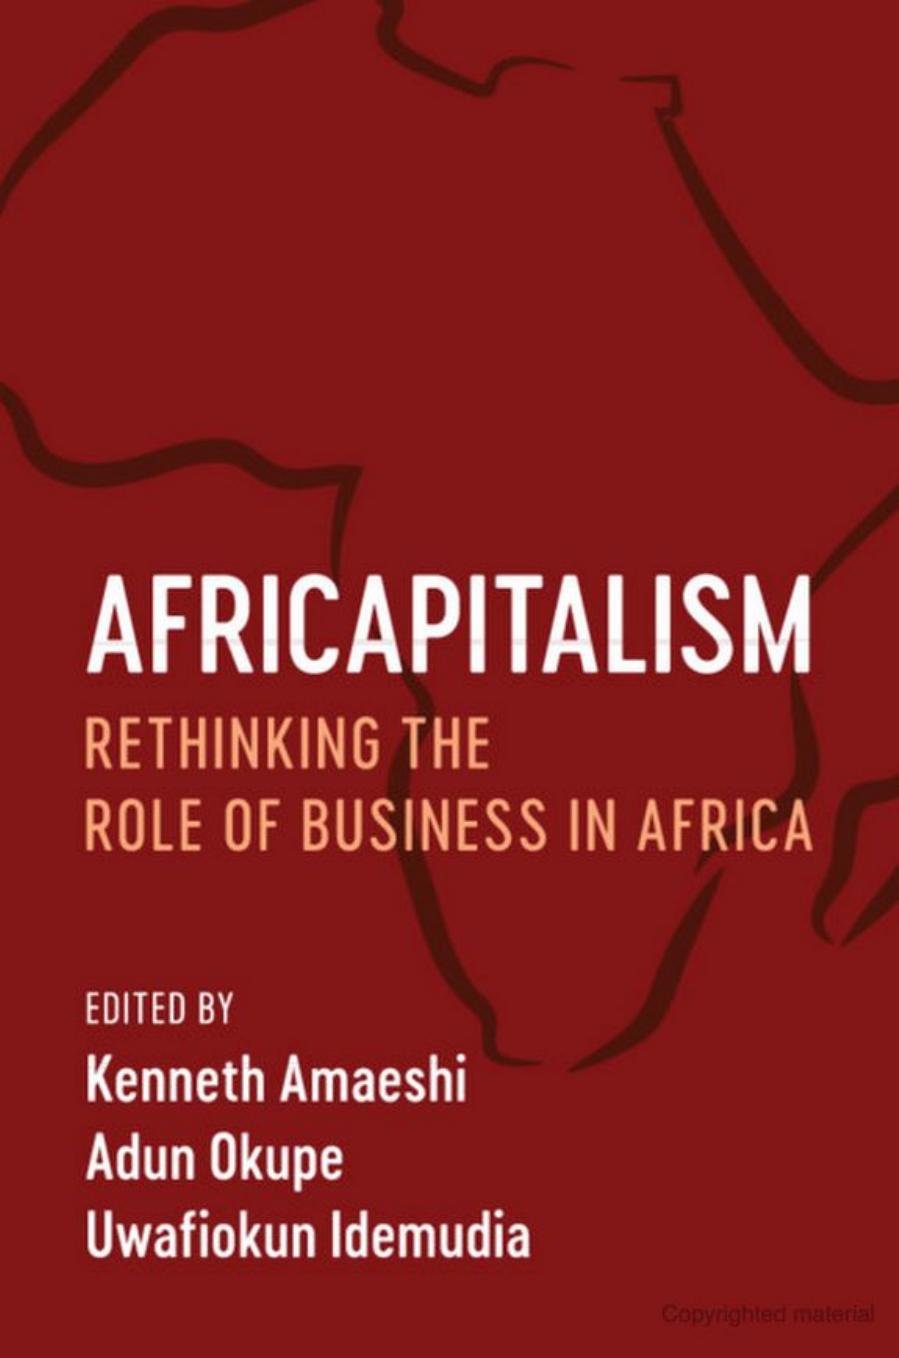 Africapitalism  Rethinking the Role of Business in Africa 2018